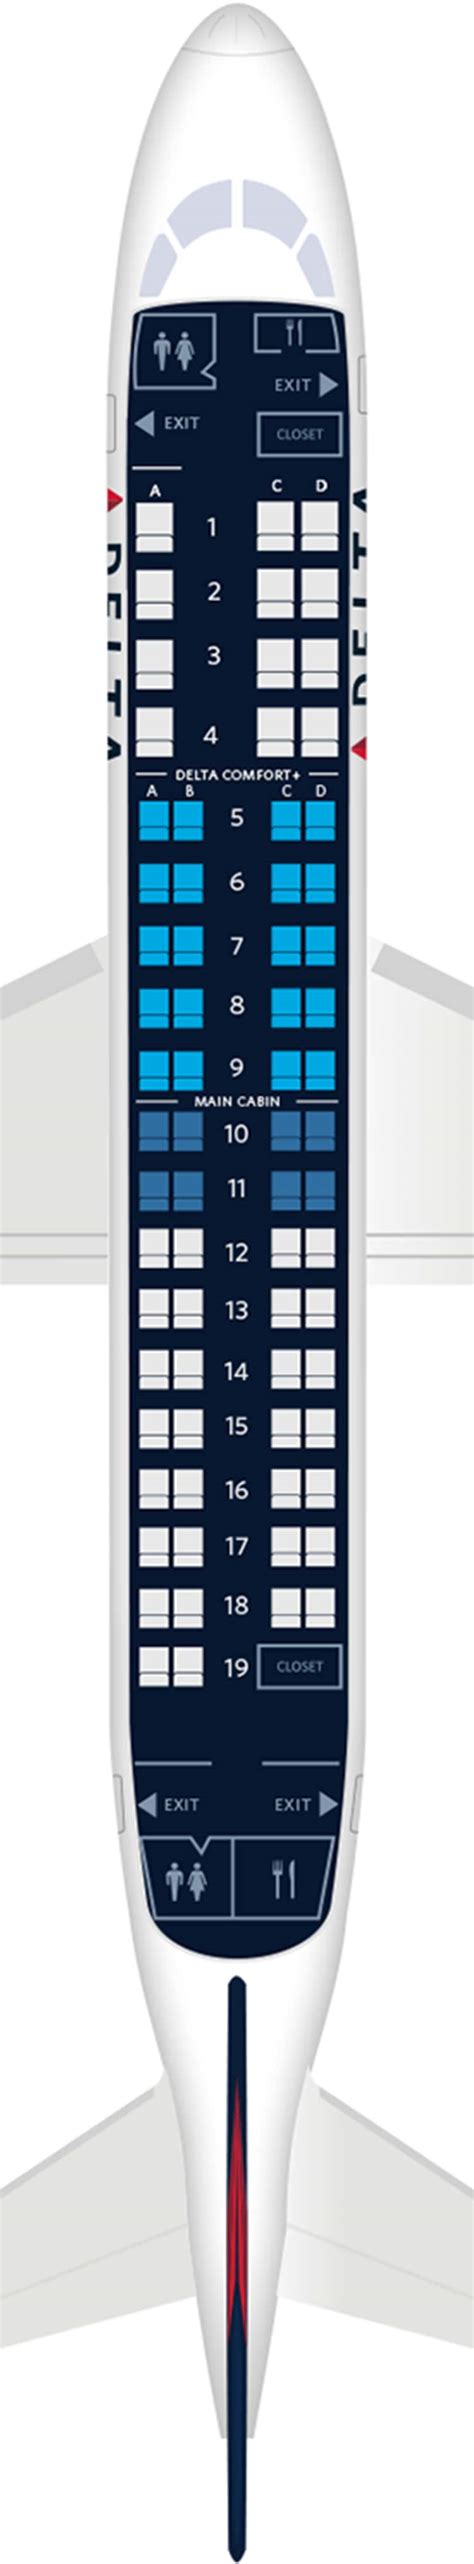 American Airlines Embraer 175 Seating Chart